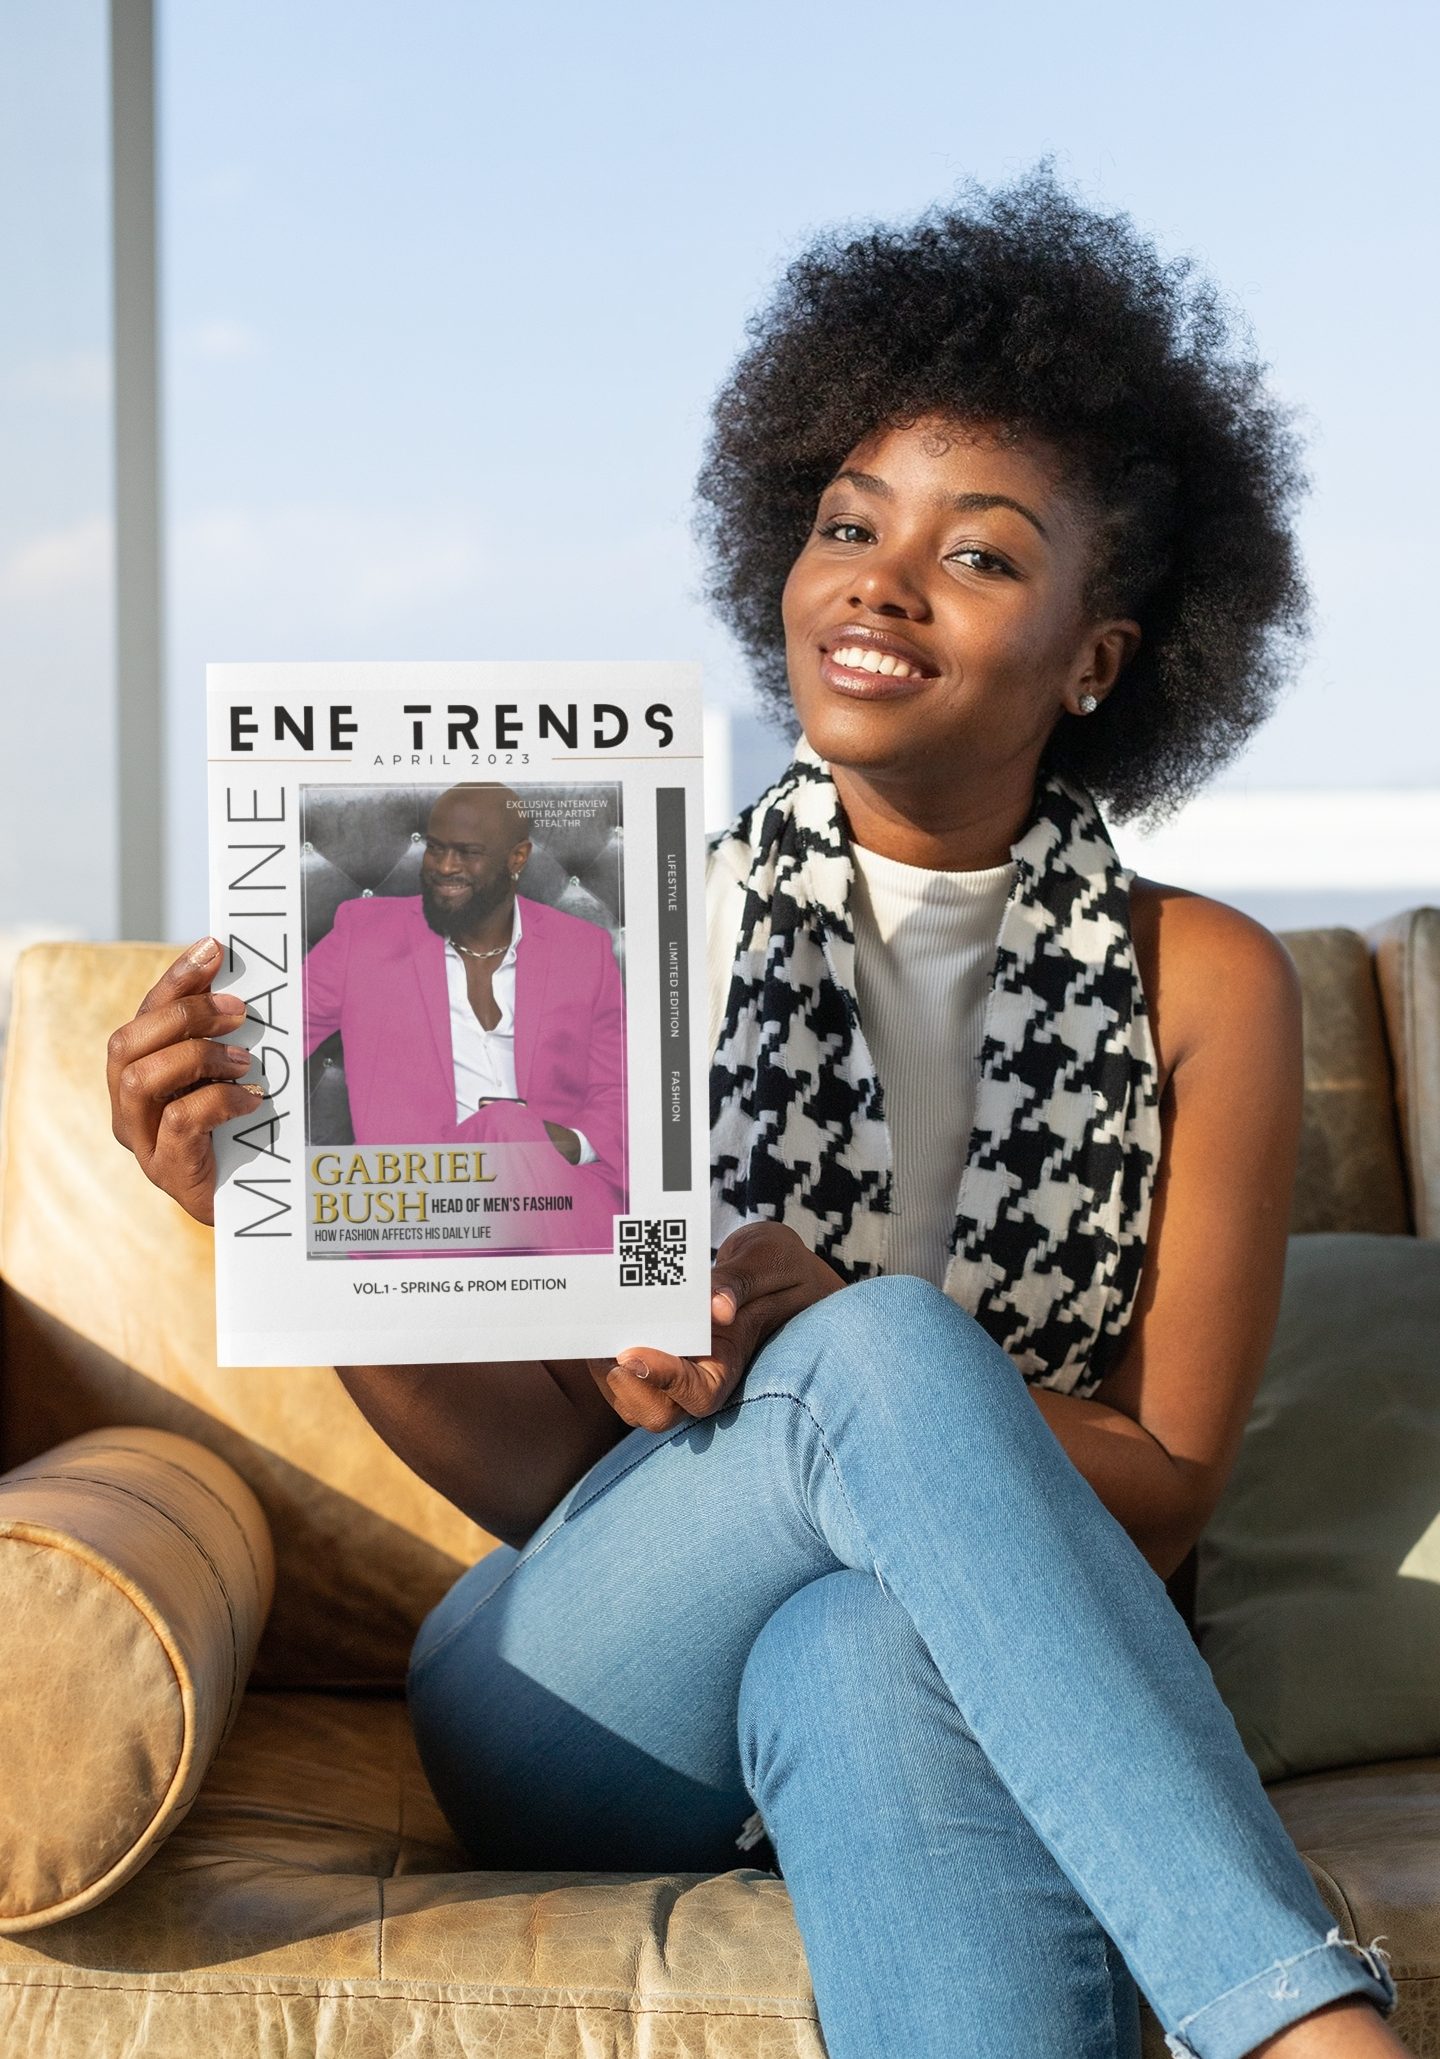 Model with ENE trends Magazine in hand smiling pretty